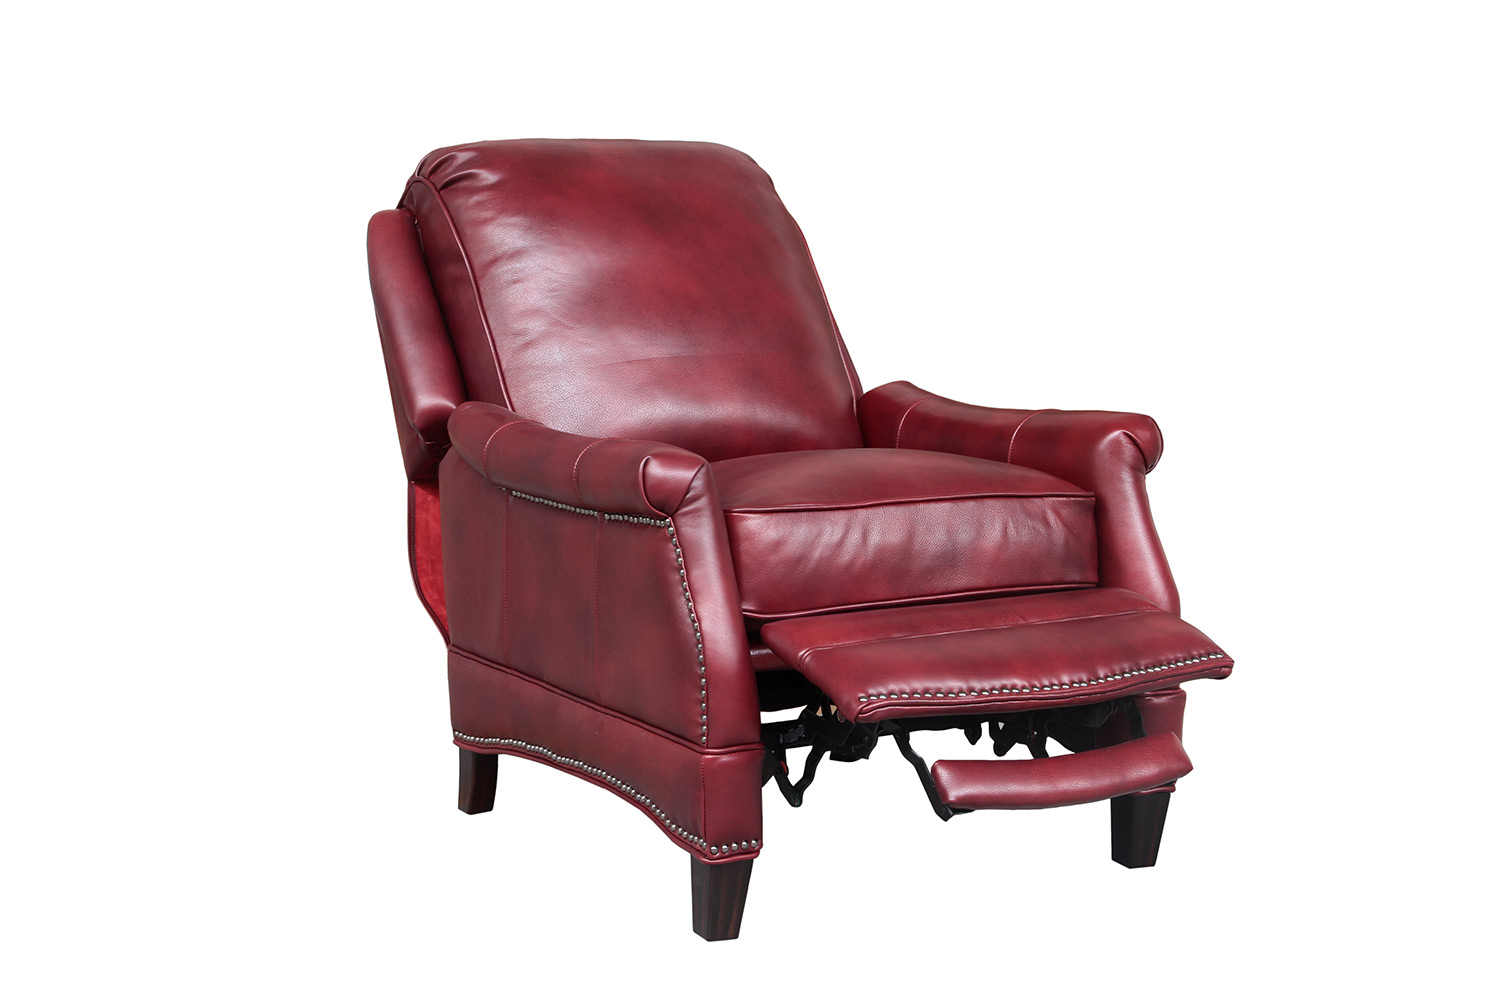 Barcalounger Ashebrooke Recliner Chair - Wenlock Carmine/All Leather